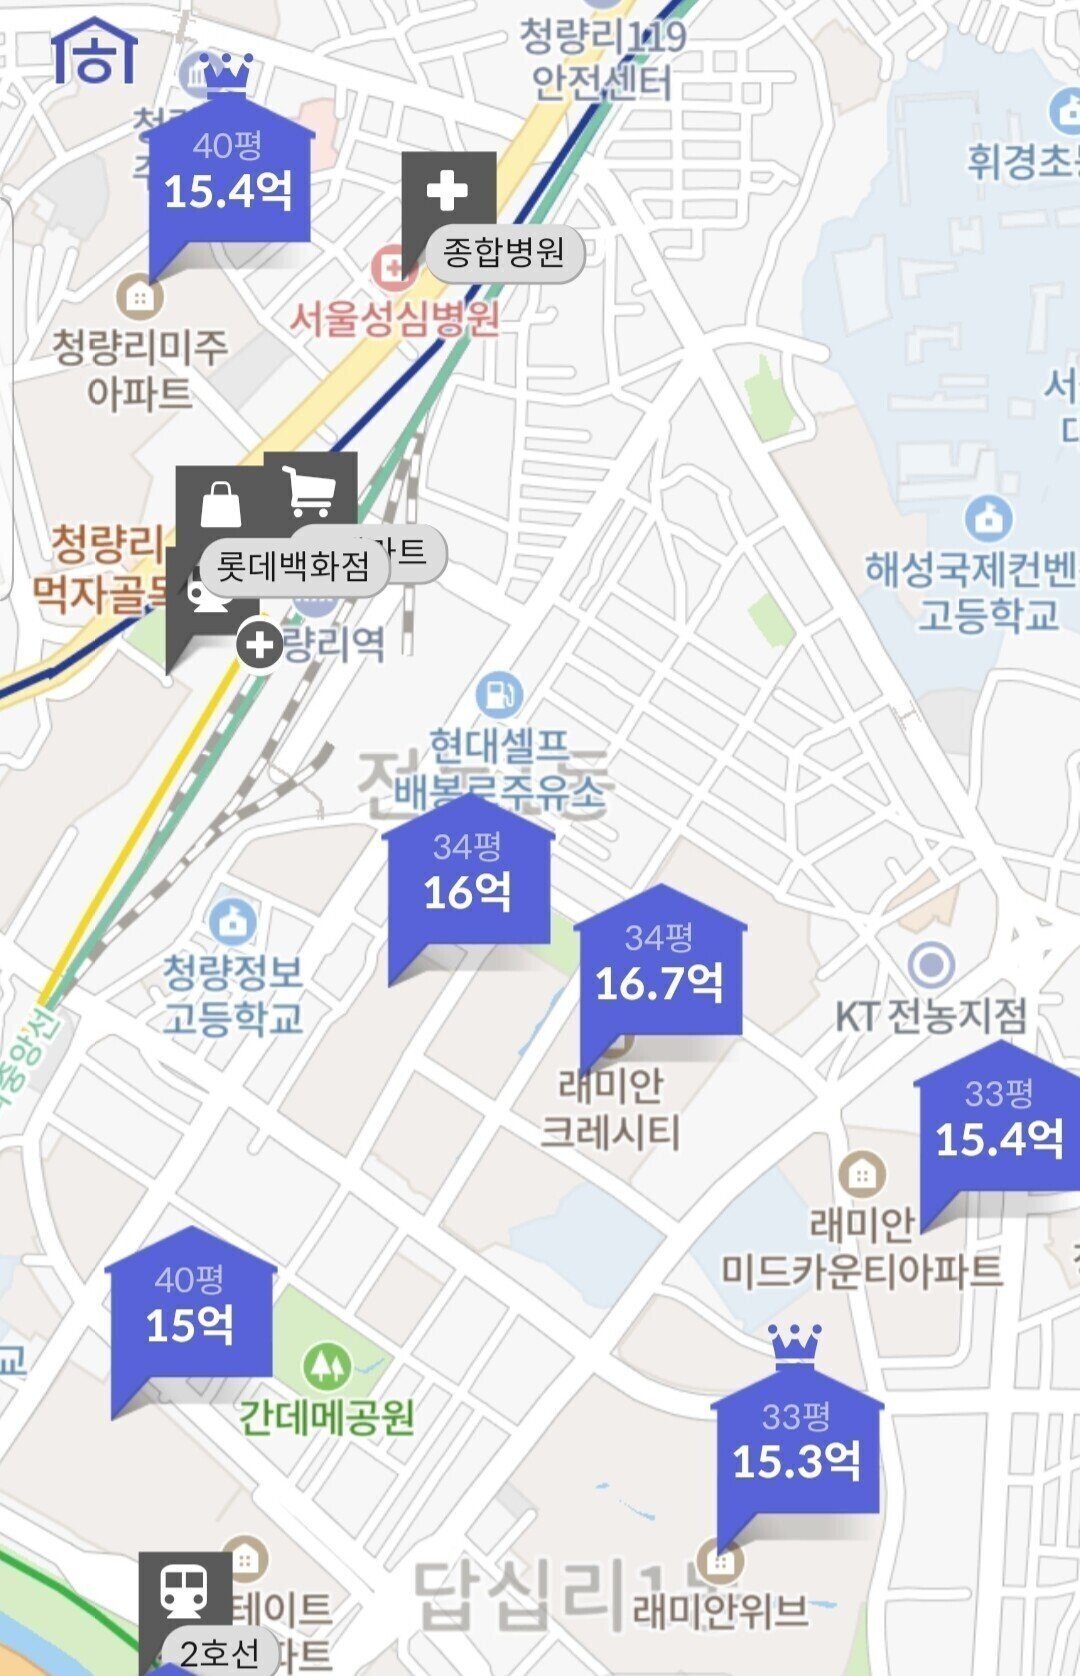 Surprised by the amazing prices of apartments in Seoul, "Save Me, Holmes"